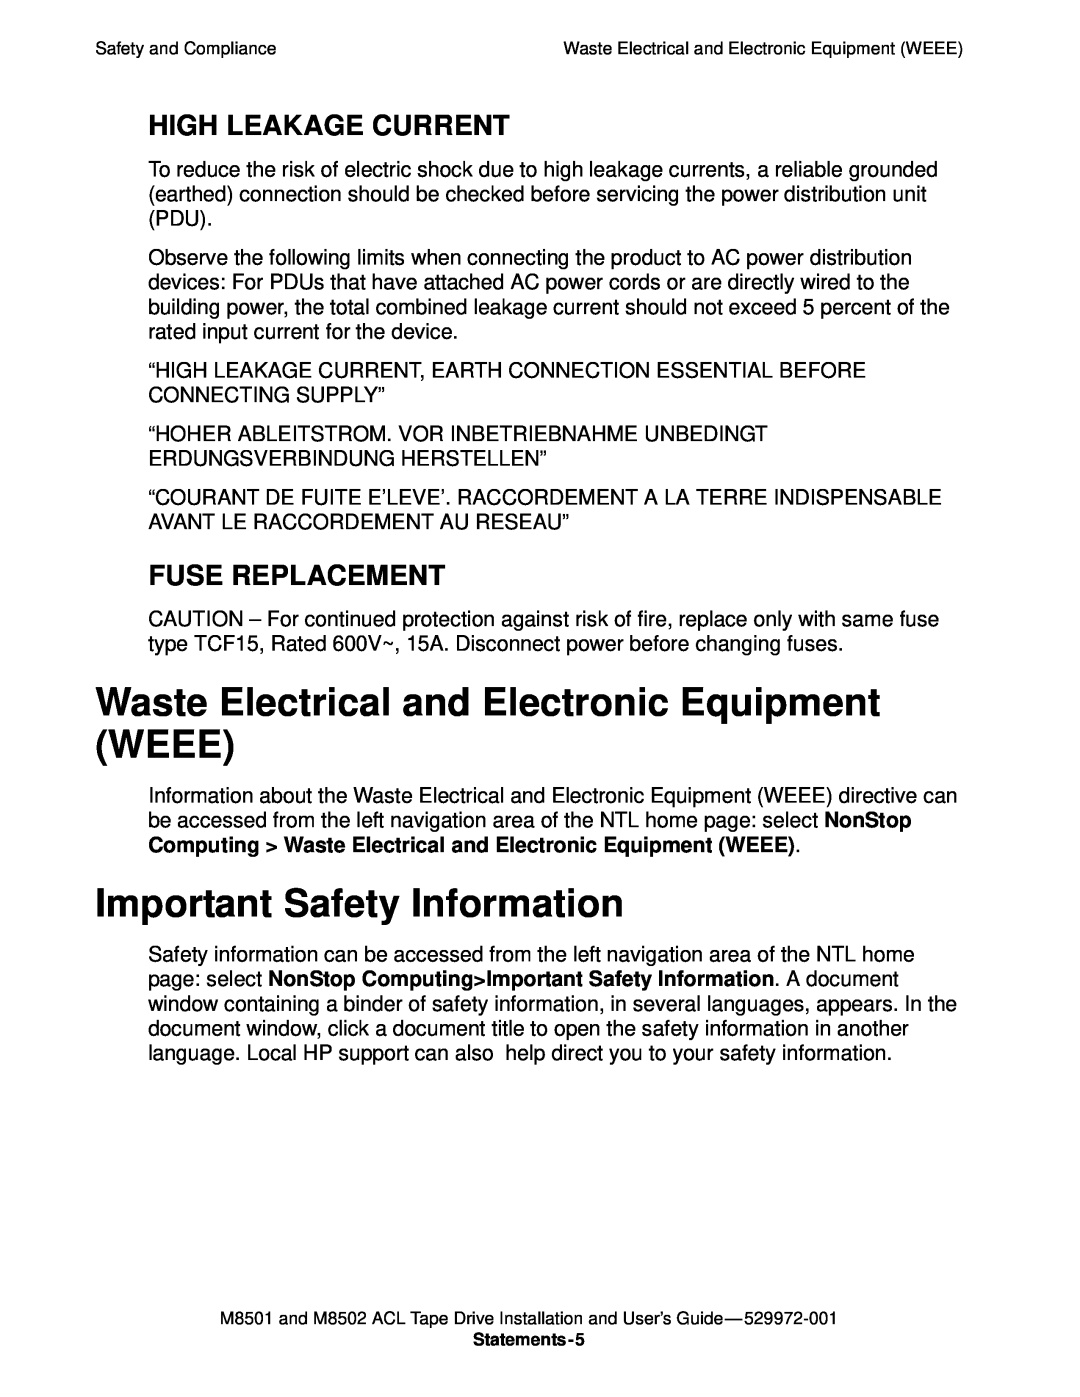 SMC Networks M8501 Waste Electrical and Electronic Equipment WEEE, Important Safety Information, High Leakage Current 